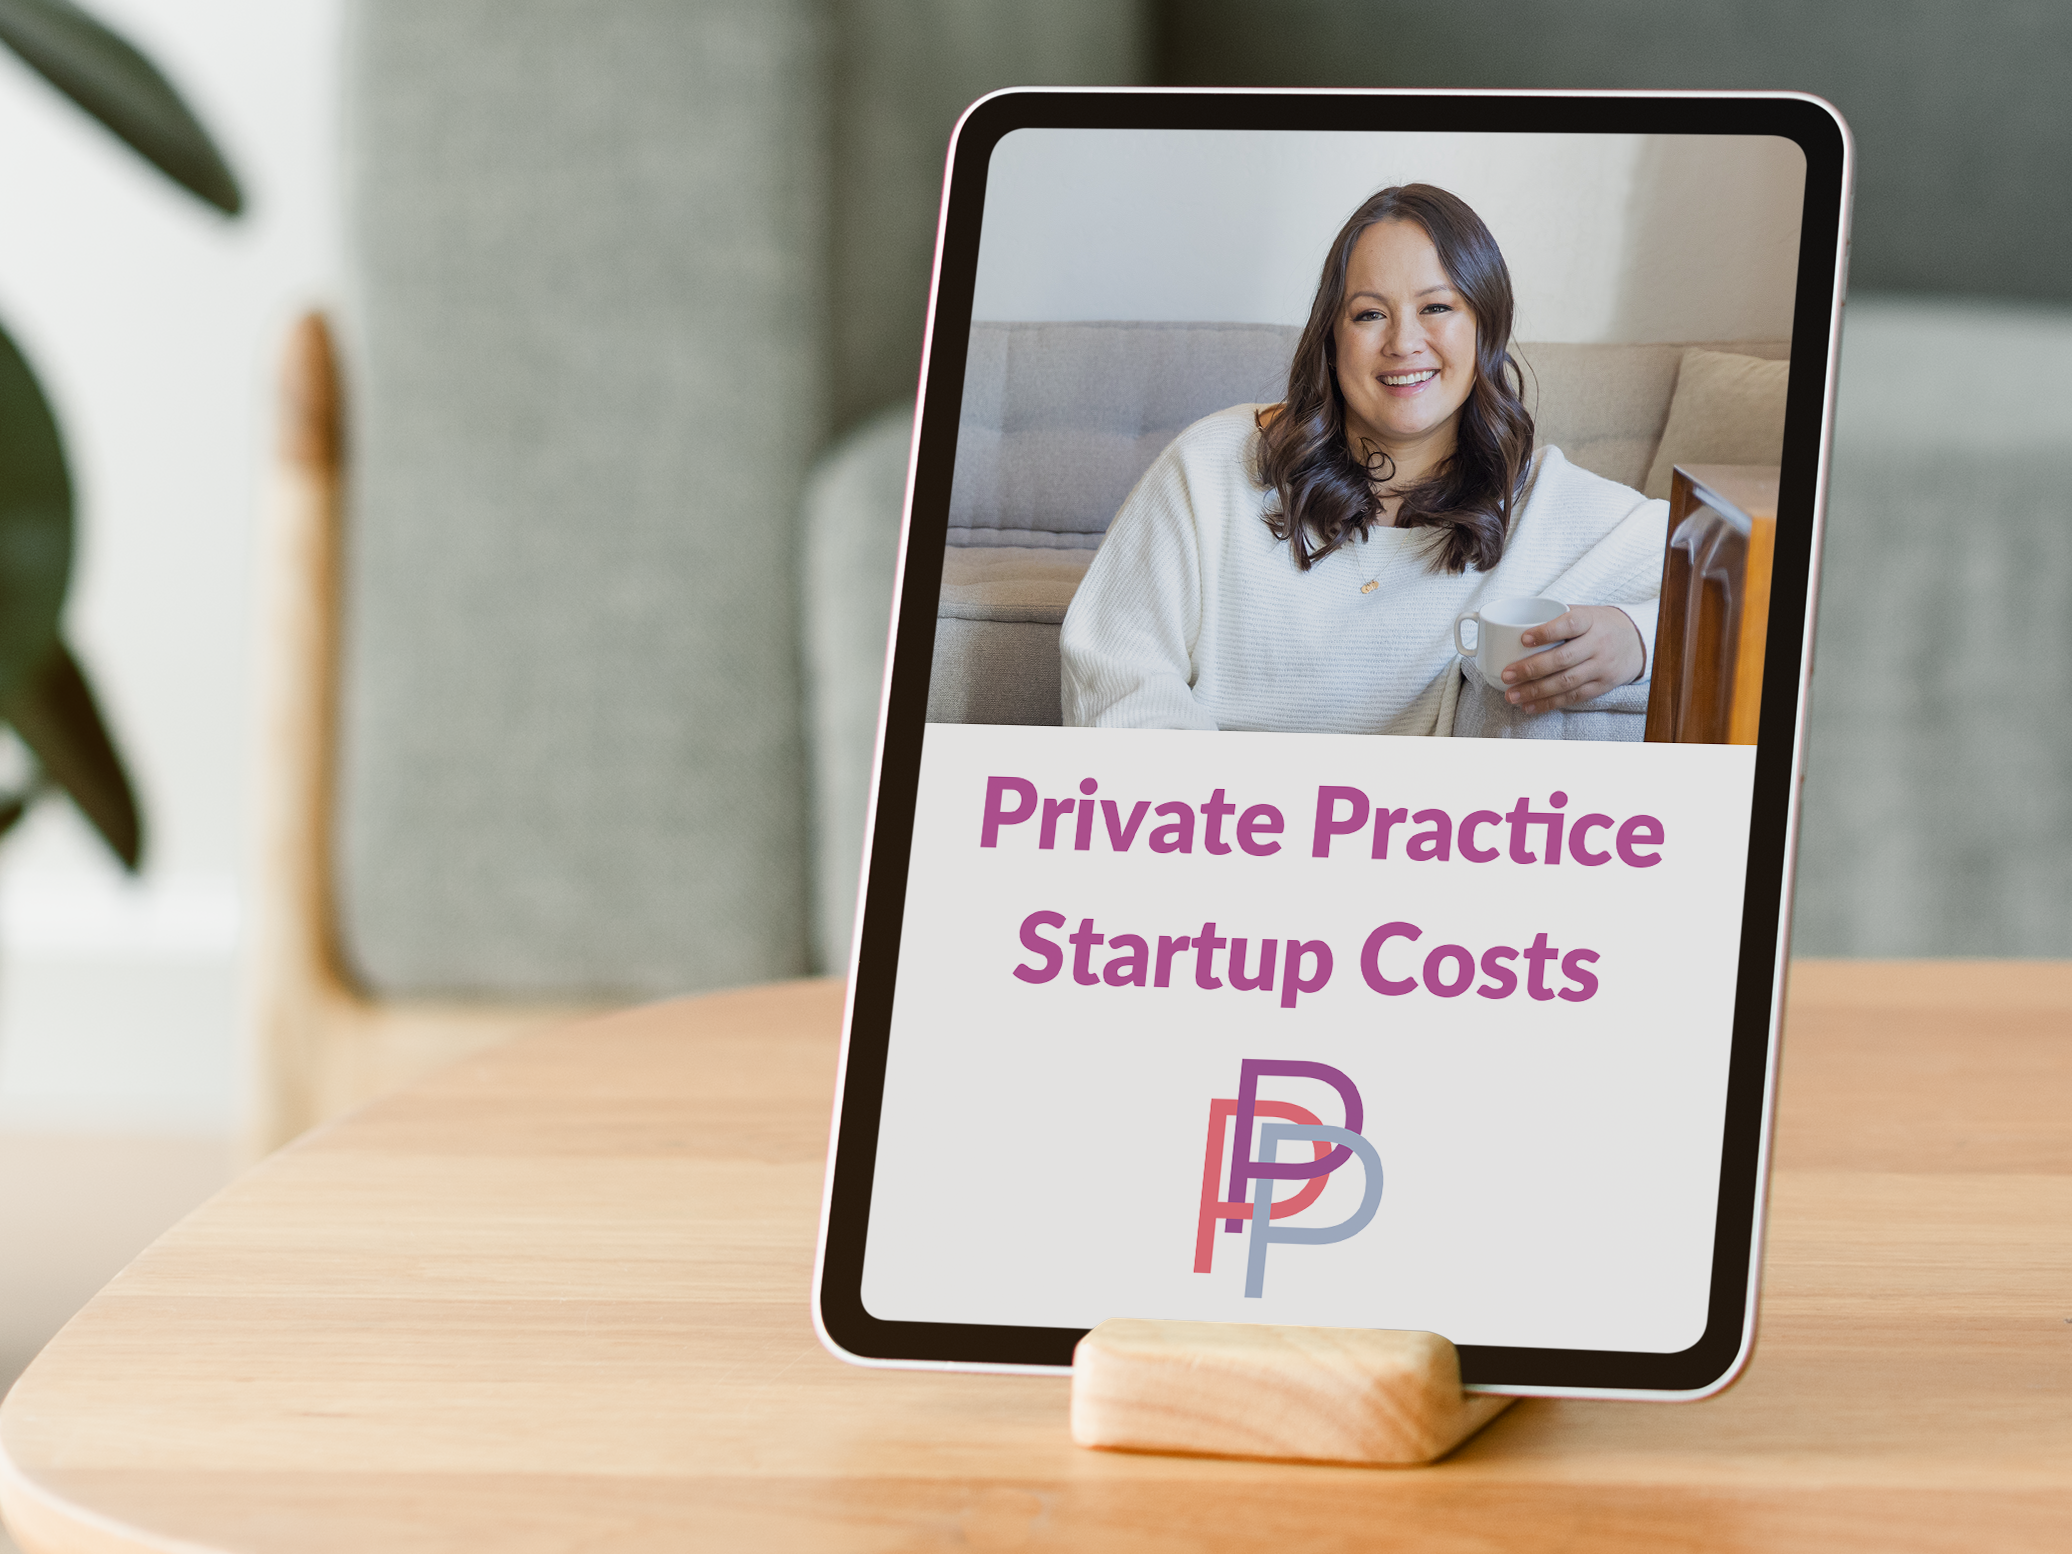 Join my mailing list for your FREE Private Practice Startup Costs worksheet.